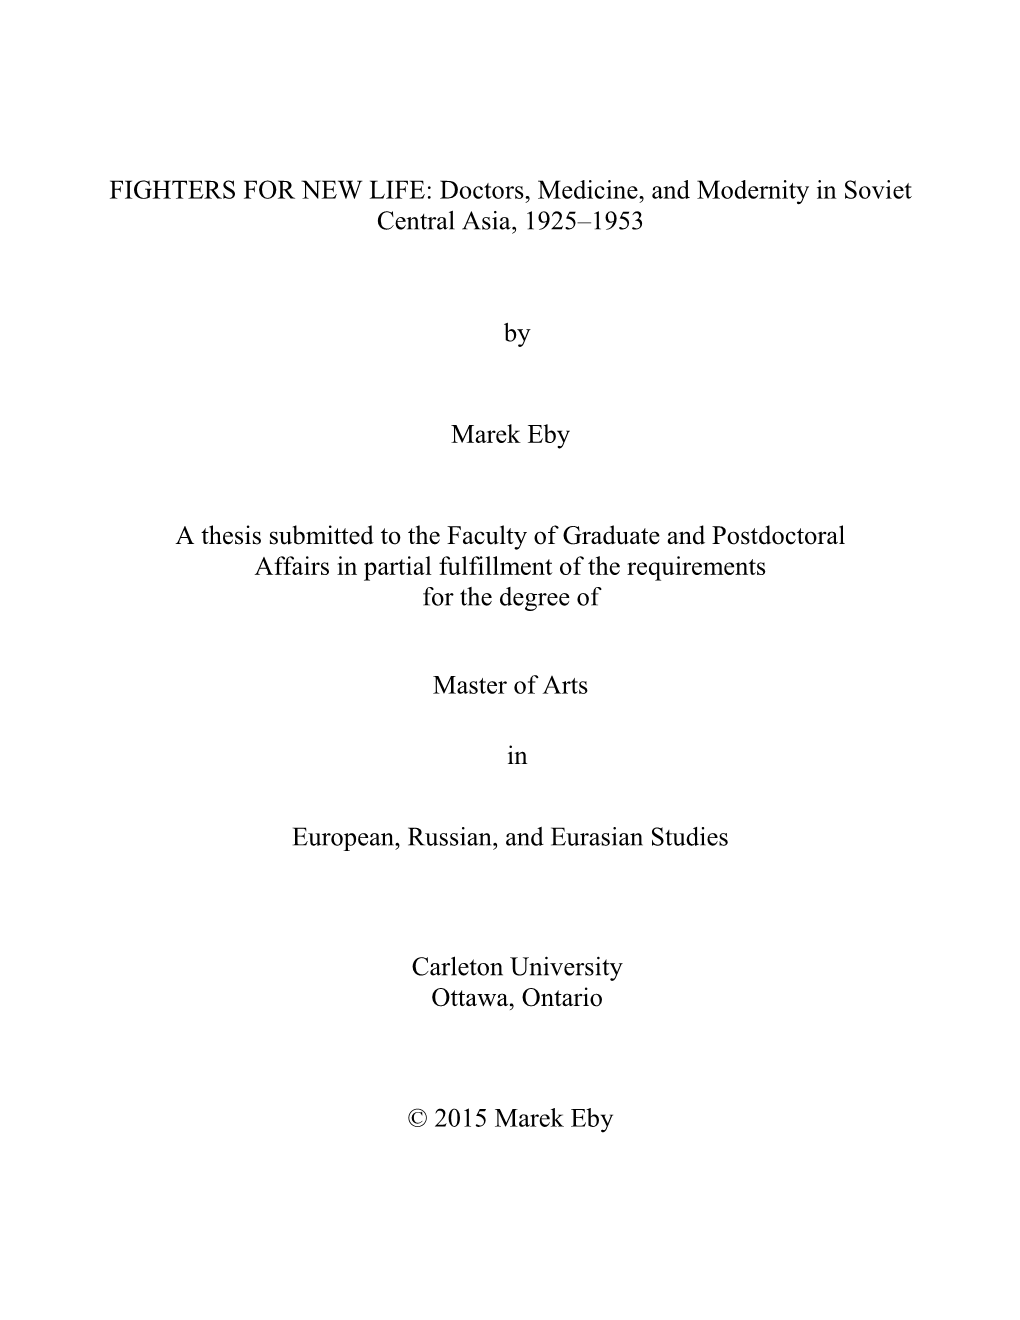 FIGHTERS for NEW LIFE: Doctors, Medicine, and Modernity in Soviet Central Asia, 1925–1953 by Marek Eby a Thesis Submitted to T